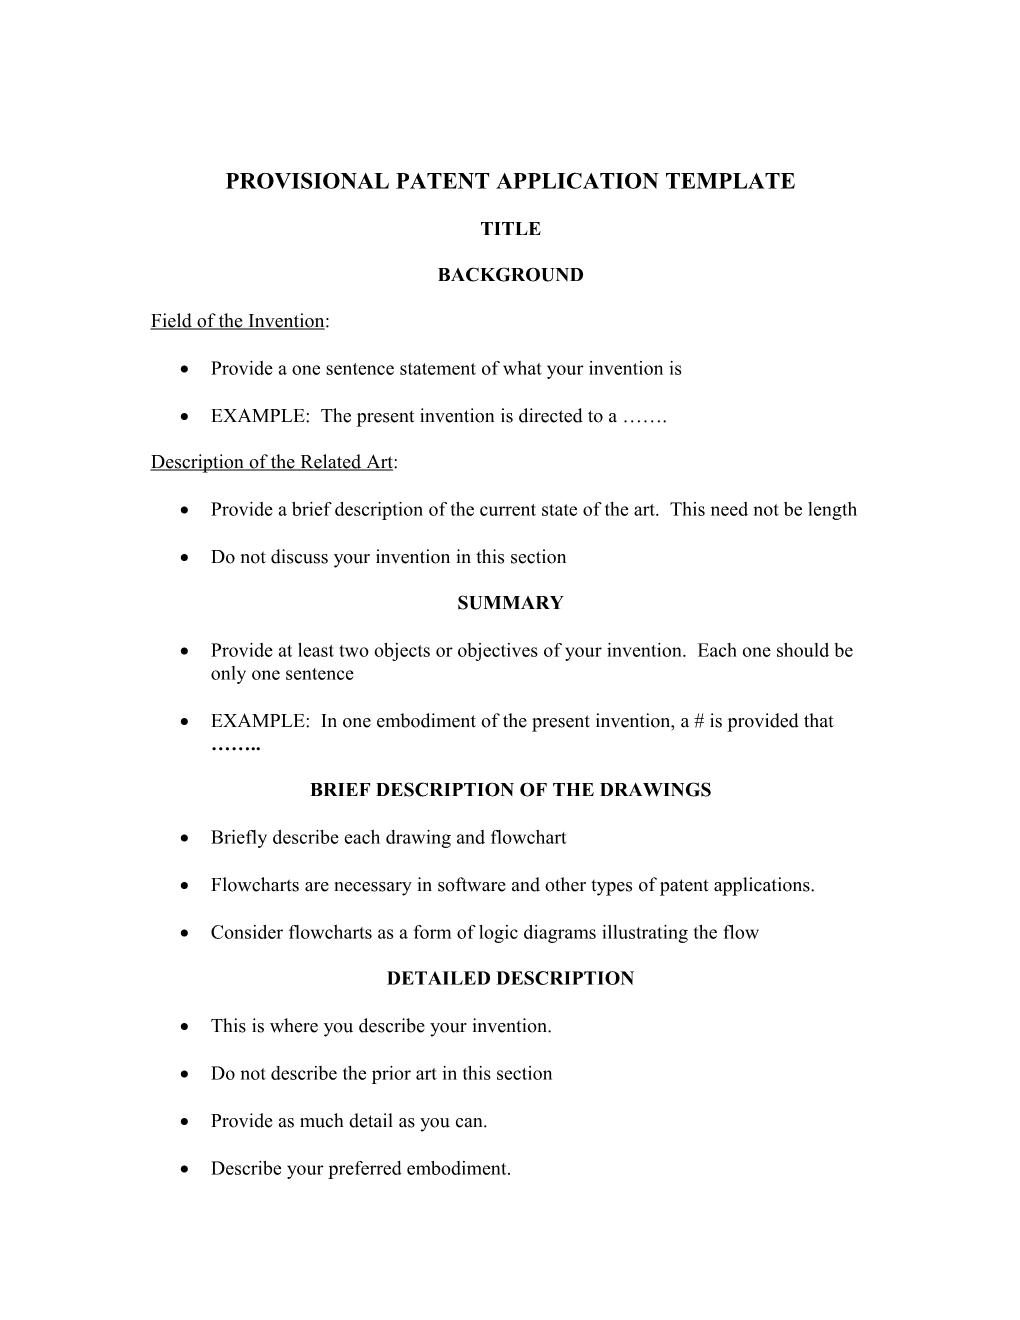 Provisional Patent Application Template